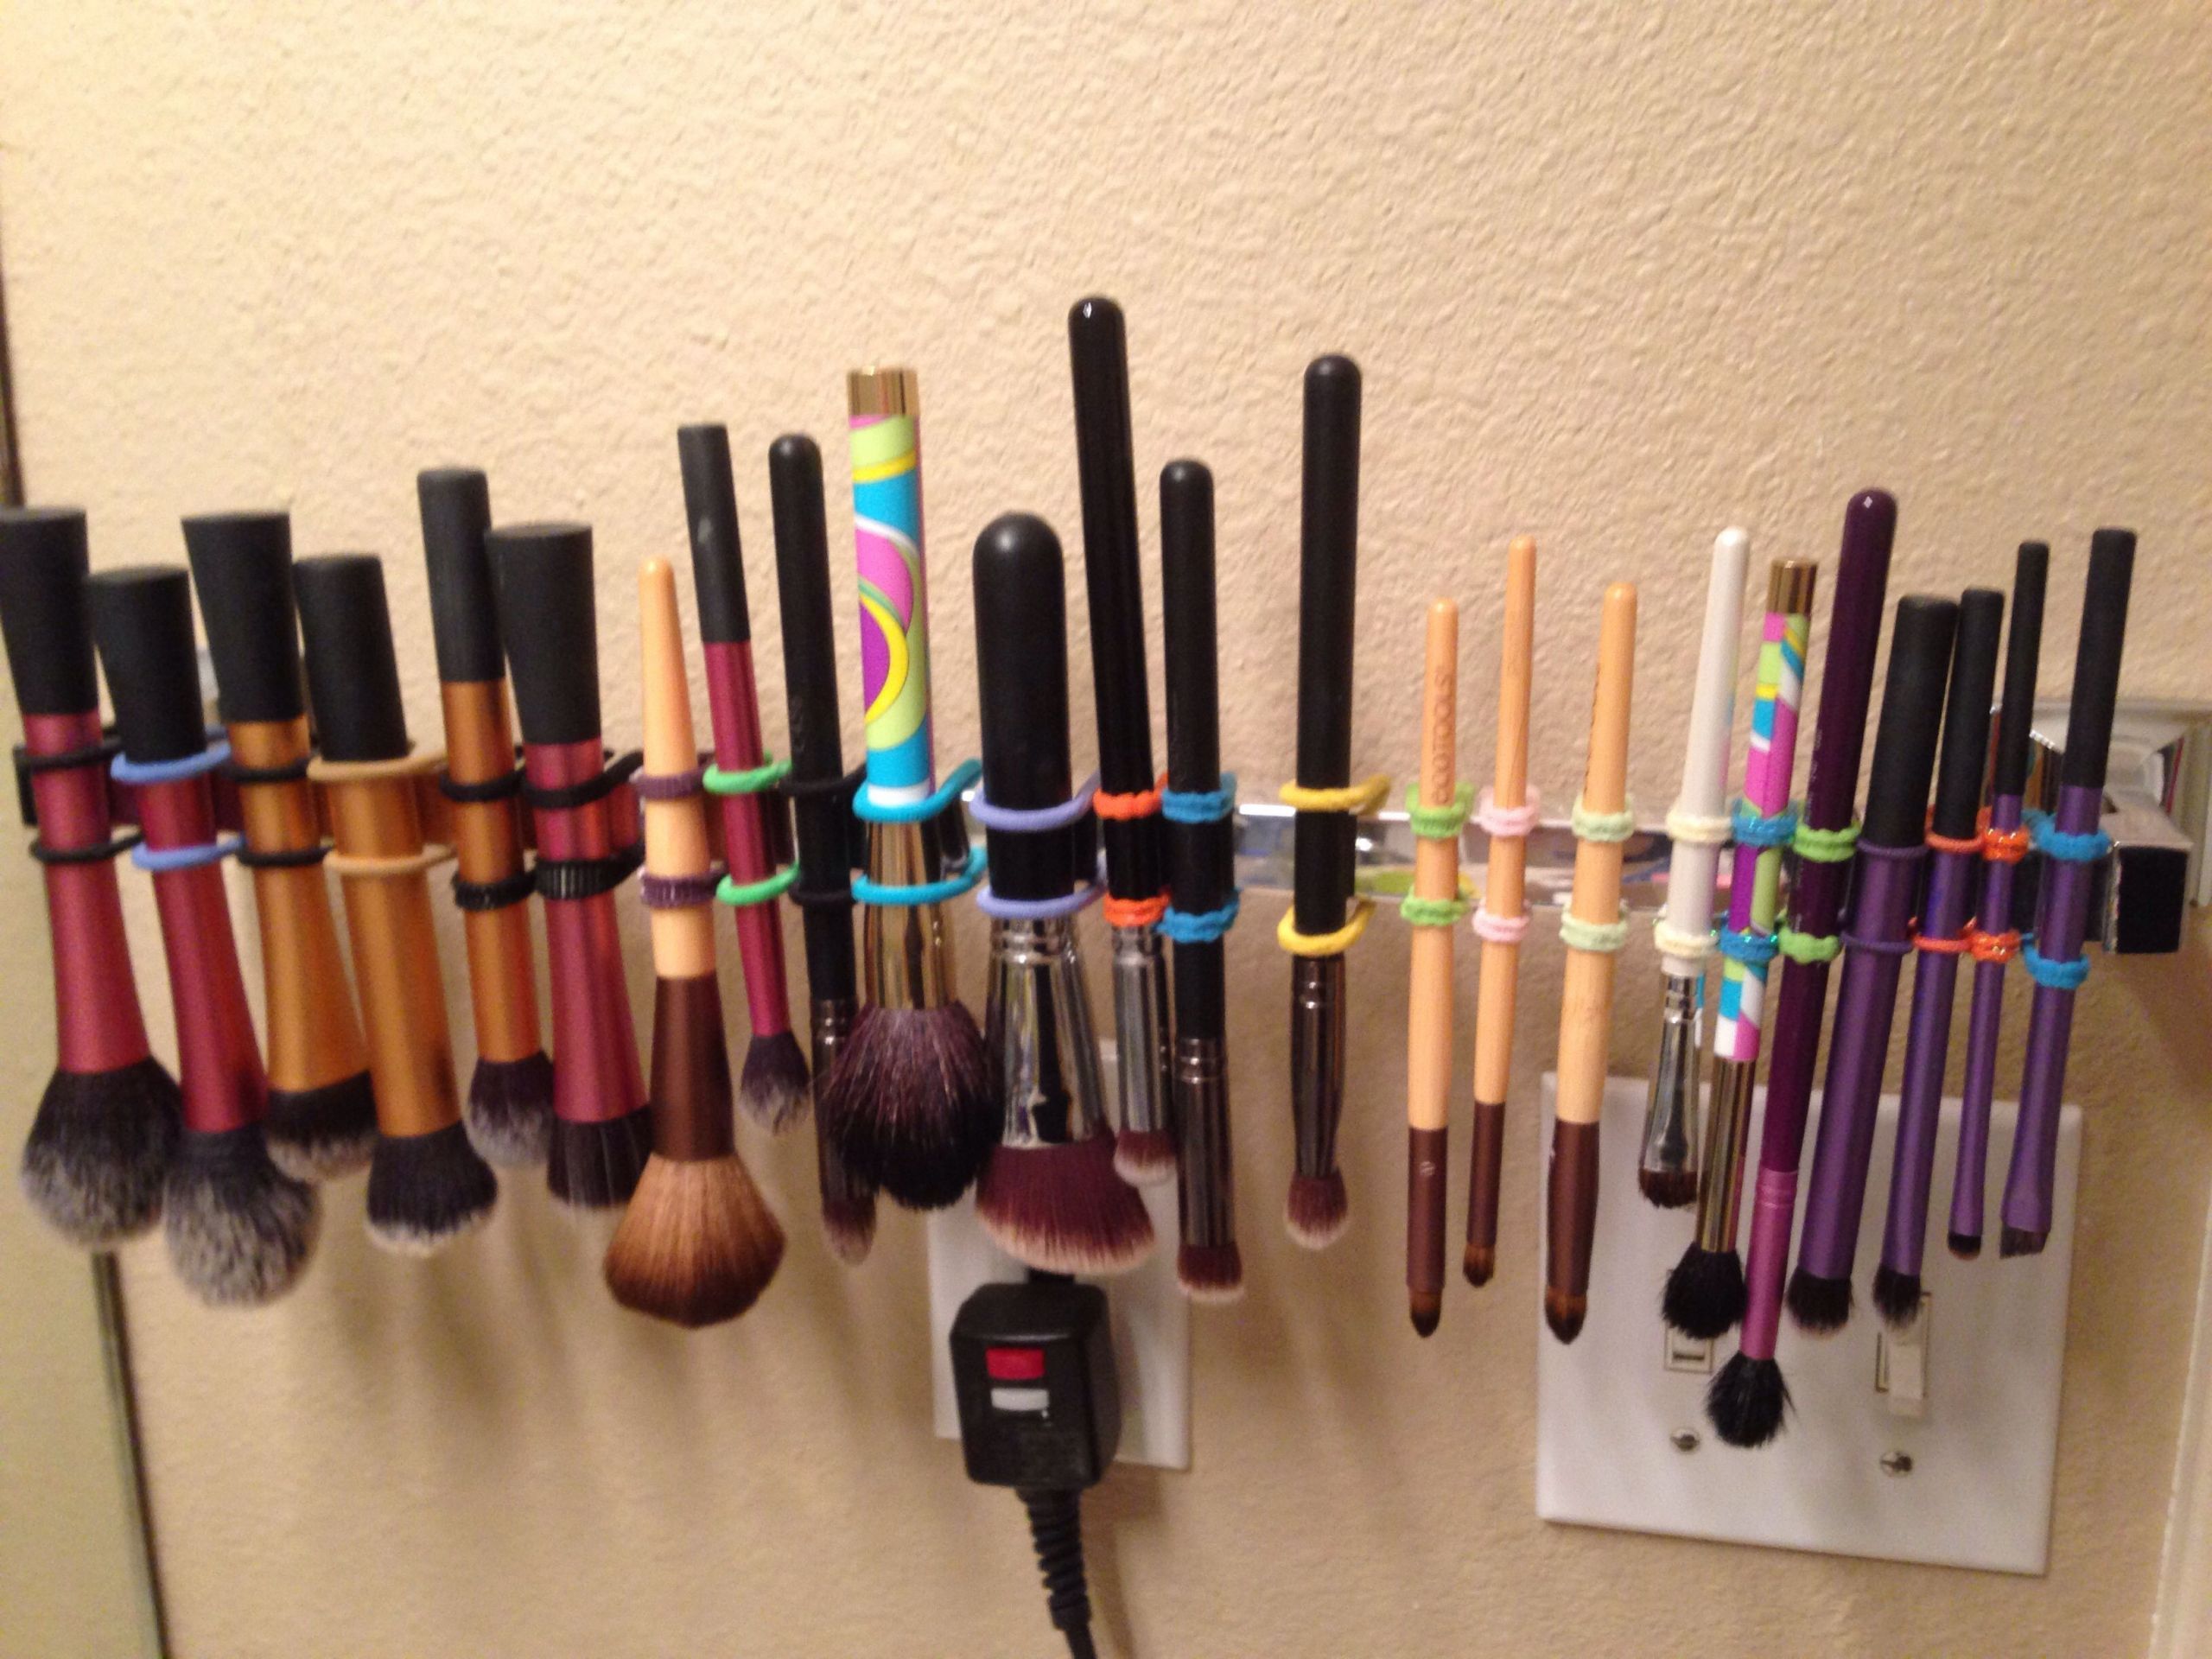 DIY Brush Drying Rack
 Drying makeup brushes You don t need an expensive drying